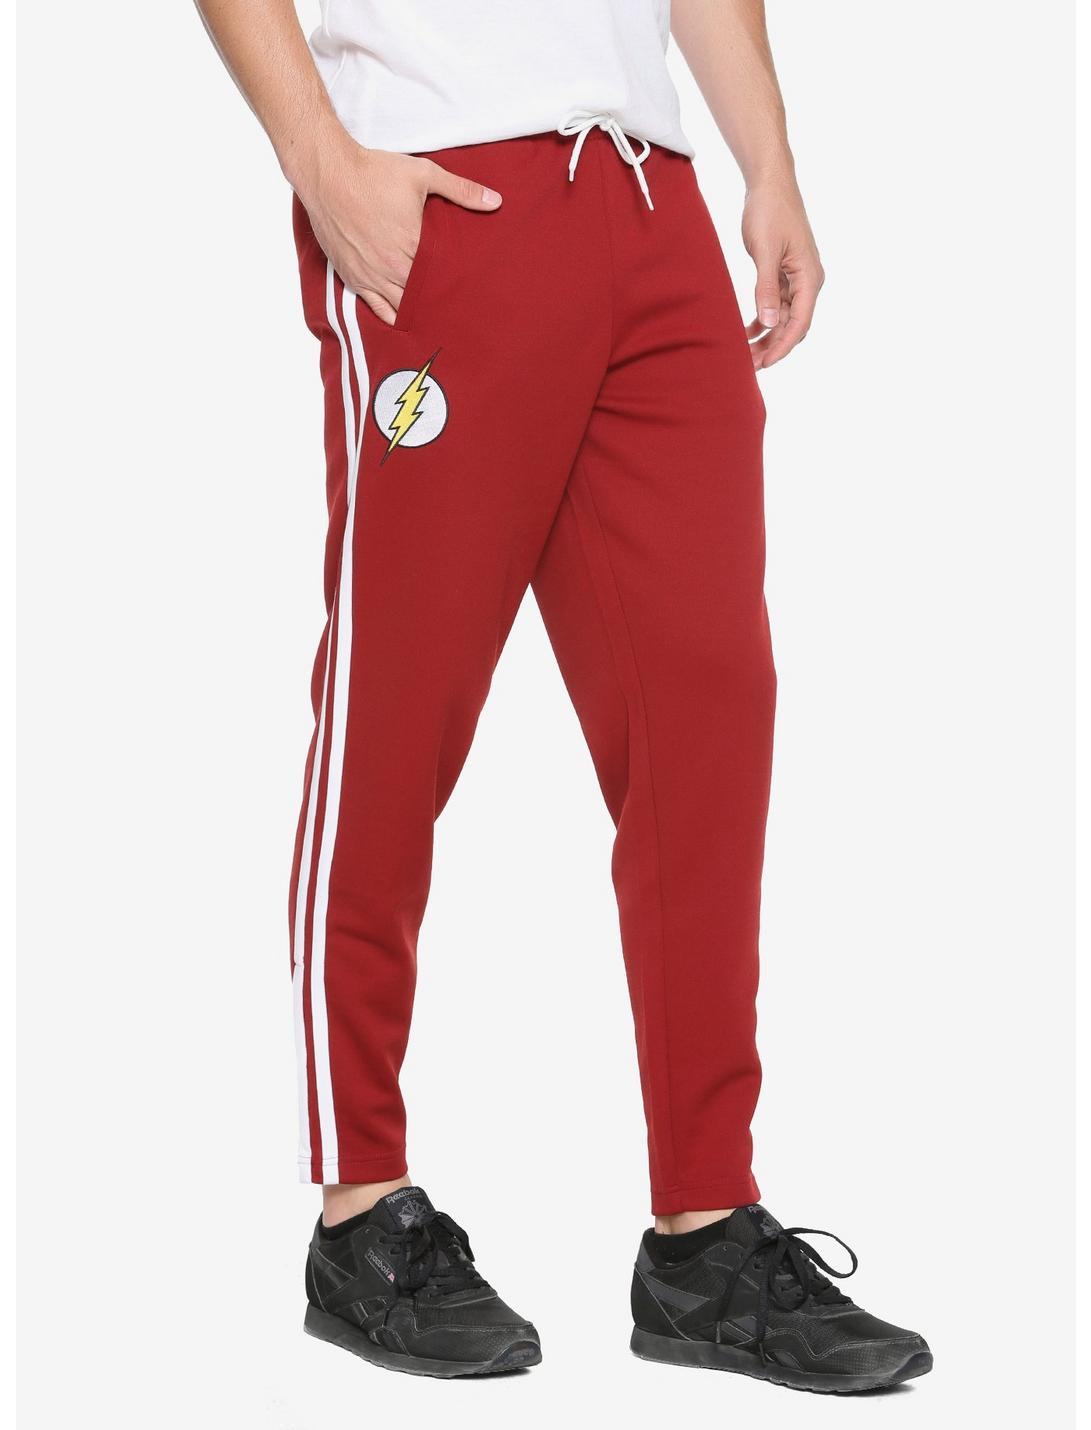 DC Comics The Flash Track Pants - BoxLunch Exclusive, RED, hi-res